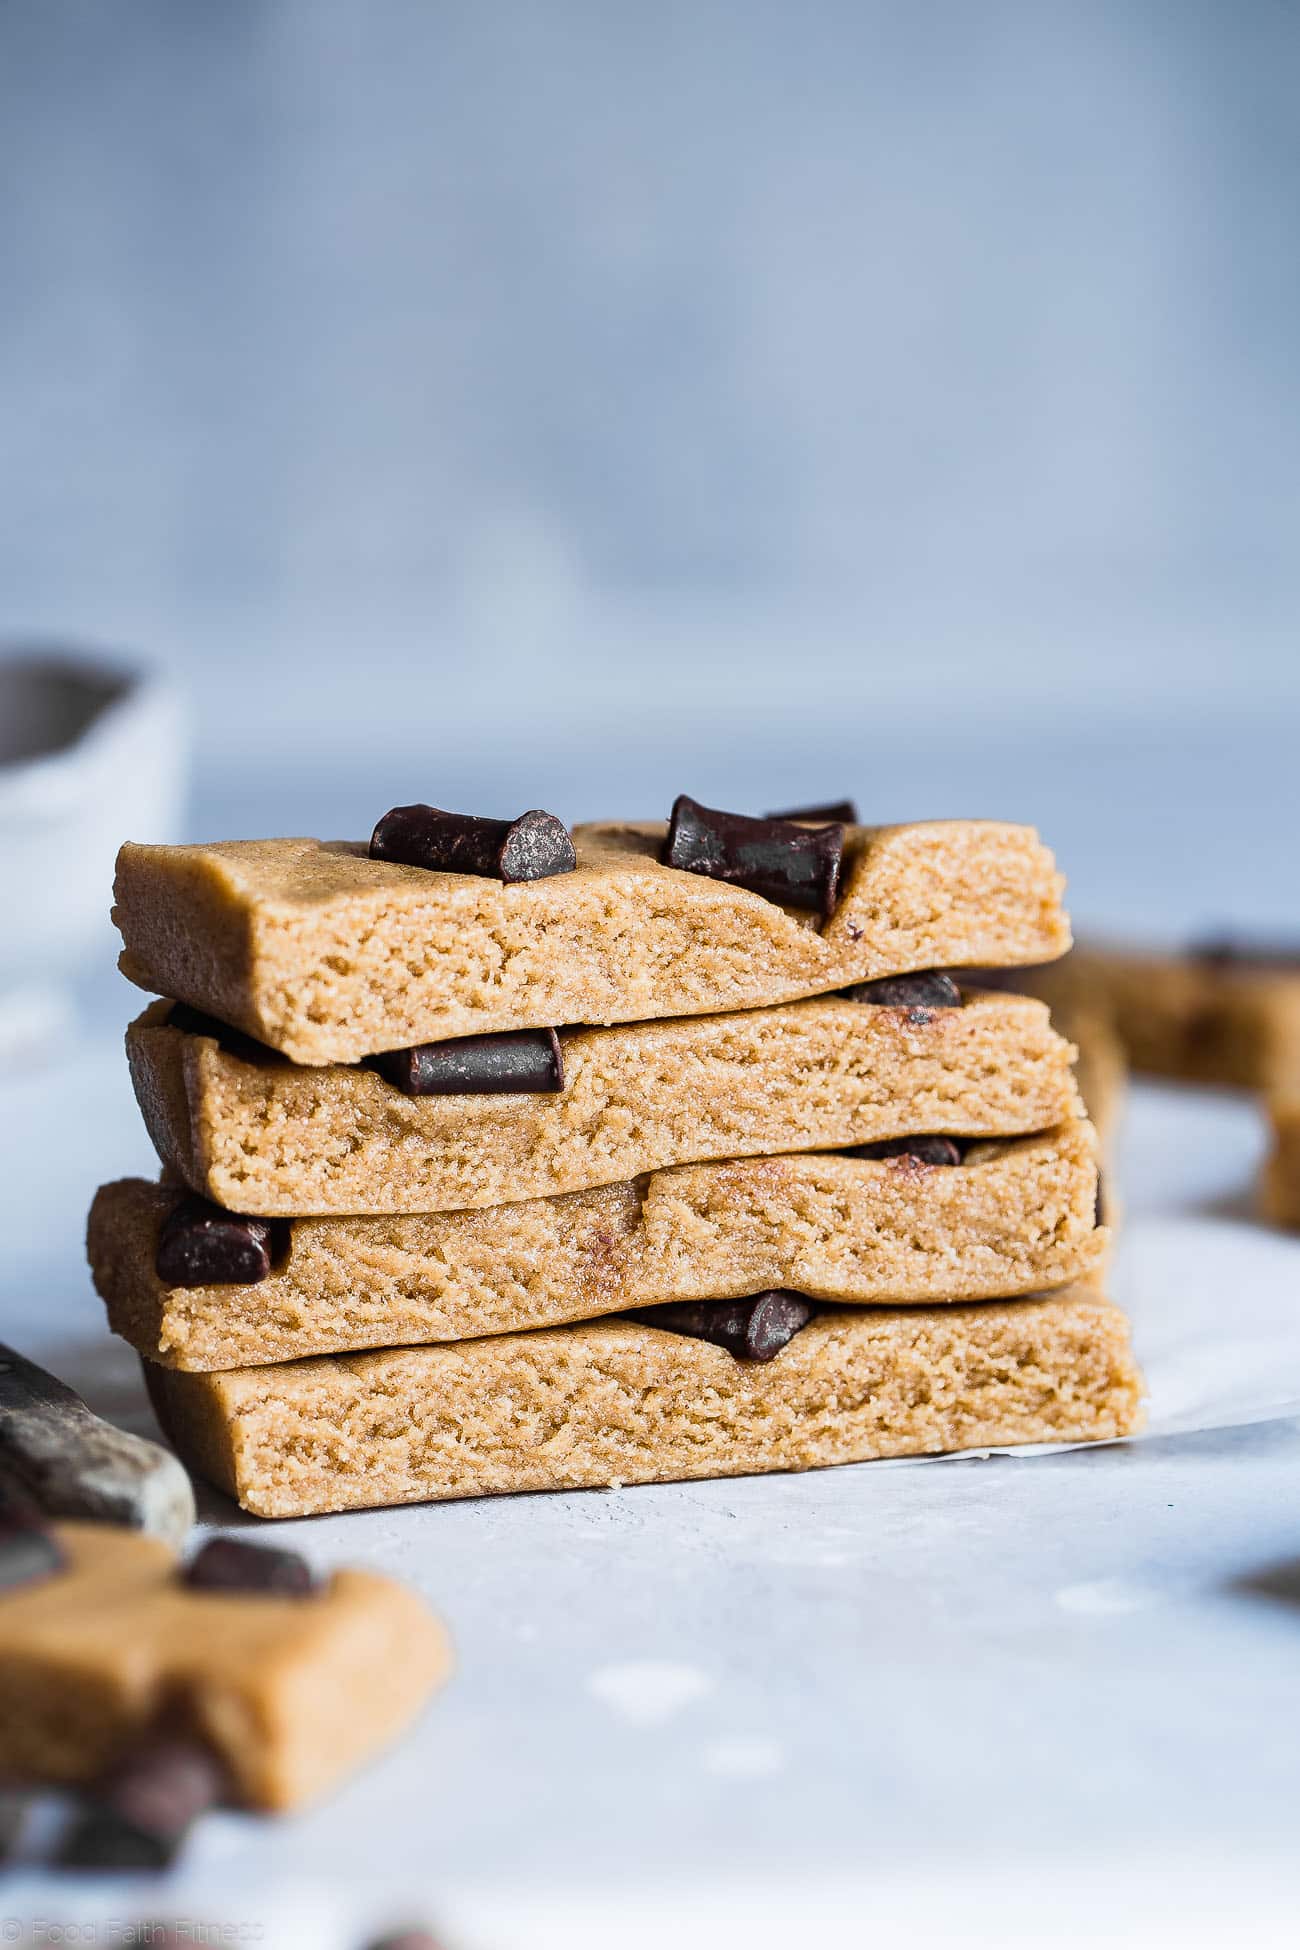 No Bake Paleo Protein Bars - These easy, no-bake homemade paleo protein bars are only 7 ingredients and are healthy, gluten, grain and dairy free! Perfect for on-the-go snacking for adults or kids! | Foodfaithfitness.com | @FoodFaithFit